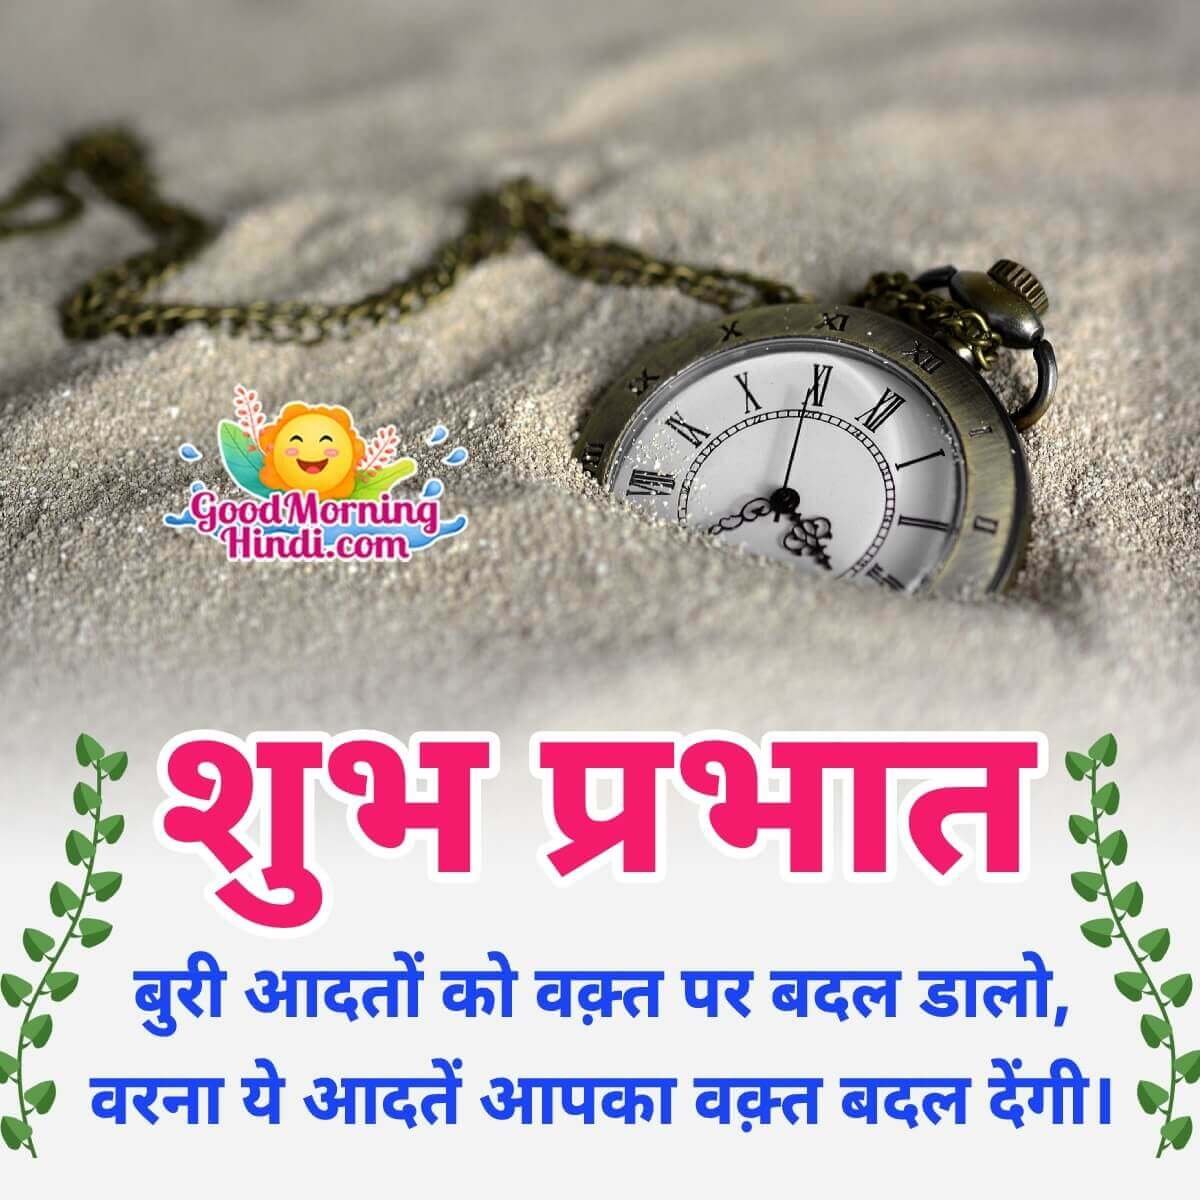 Good Morning Hindi Thoughts Images - Good Morning Wishes & Images ...